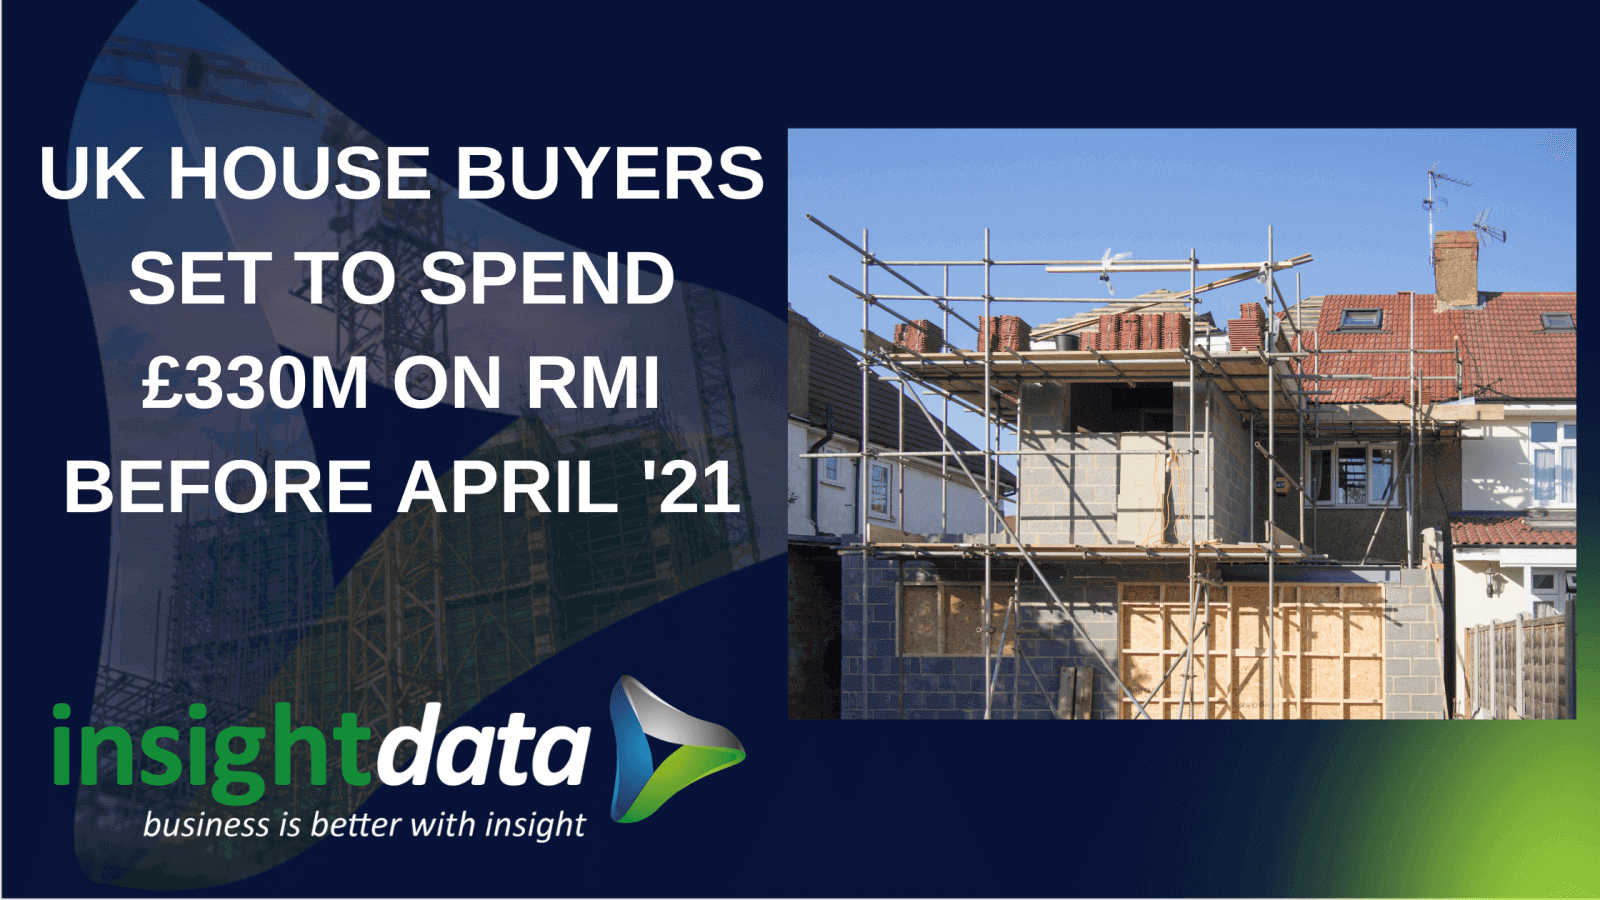 UK house buyers set to spend £330m on RMI before April 2021